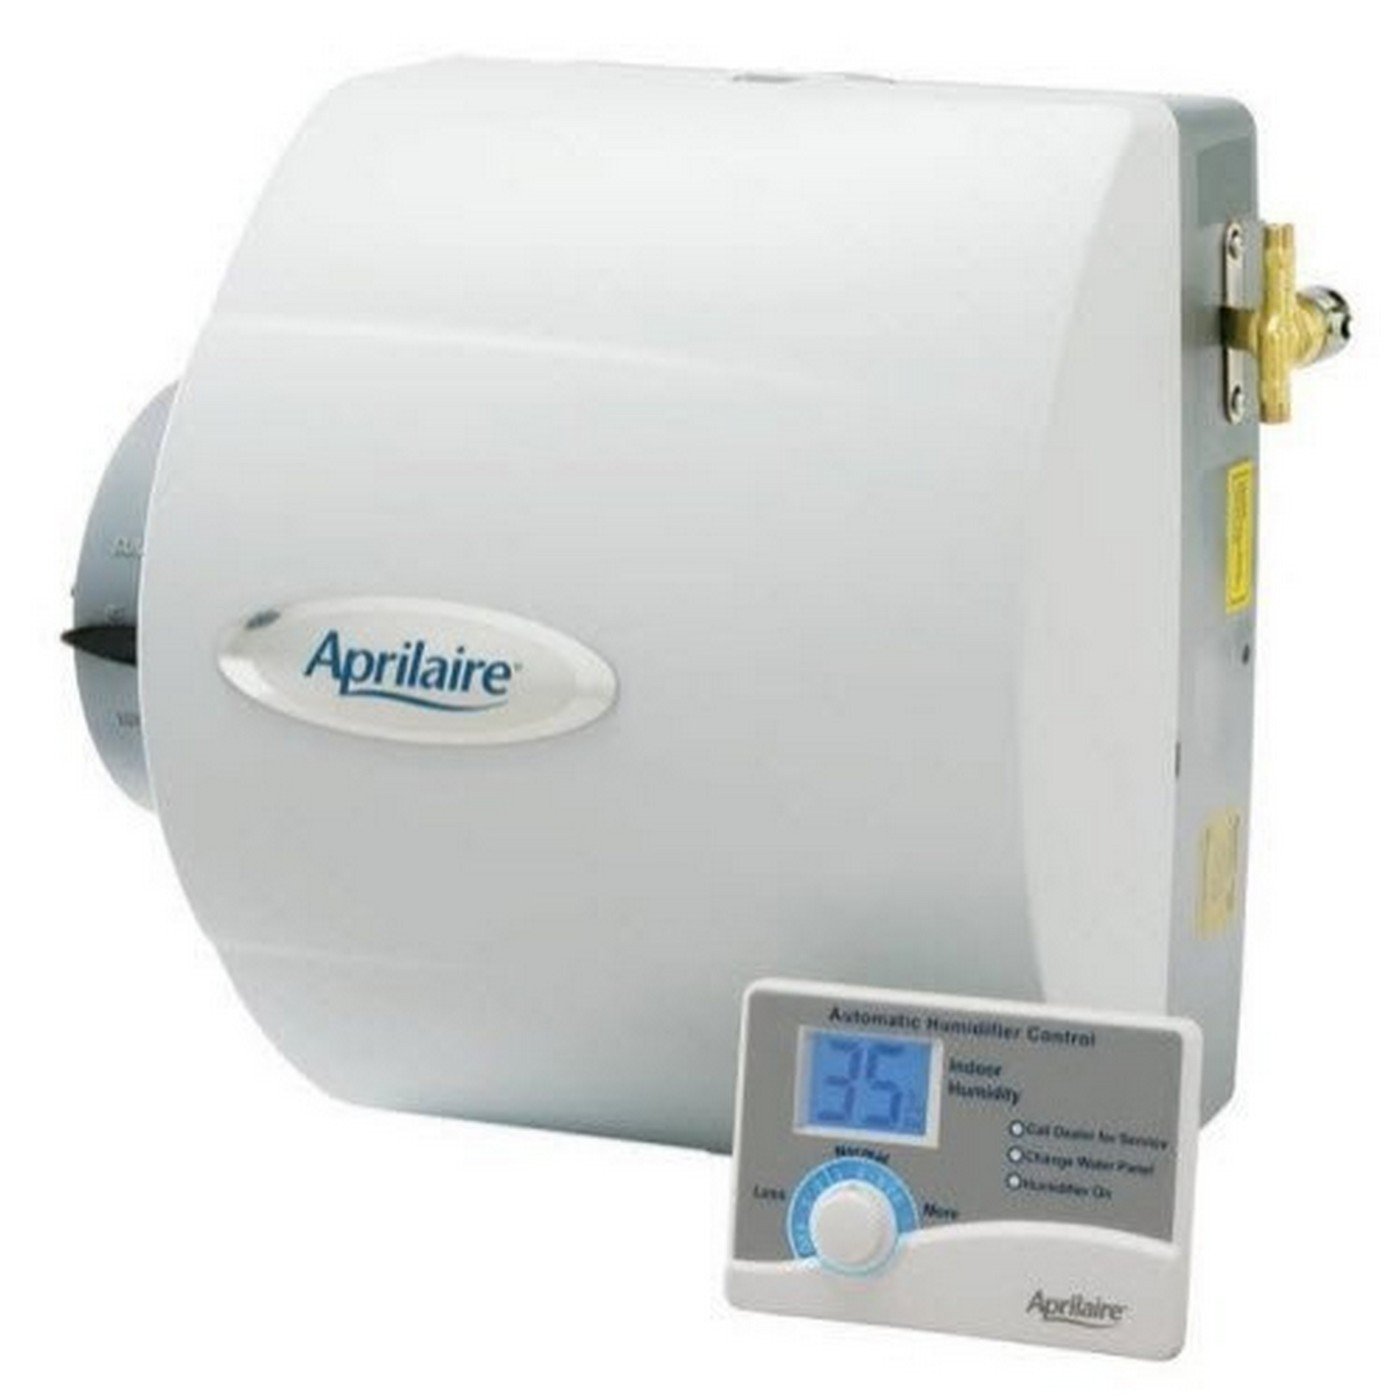 Aprilaire 500 Whole House Humidifier with Digital Control $125.79 + Free Shipping